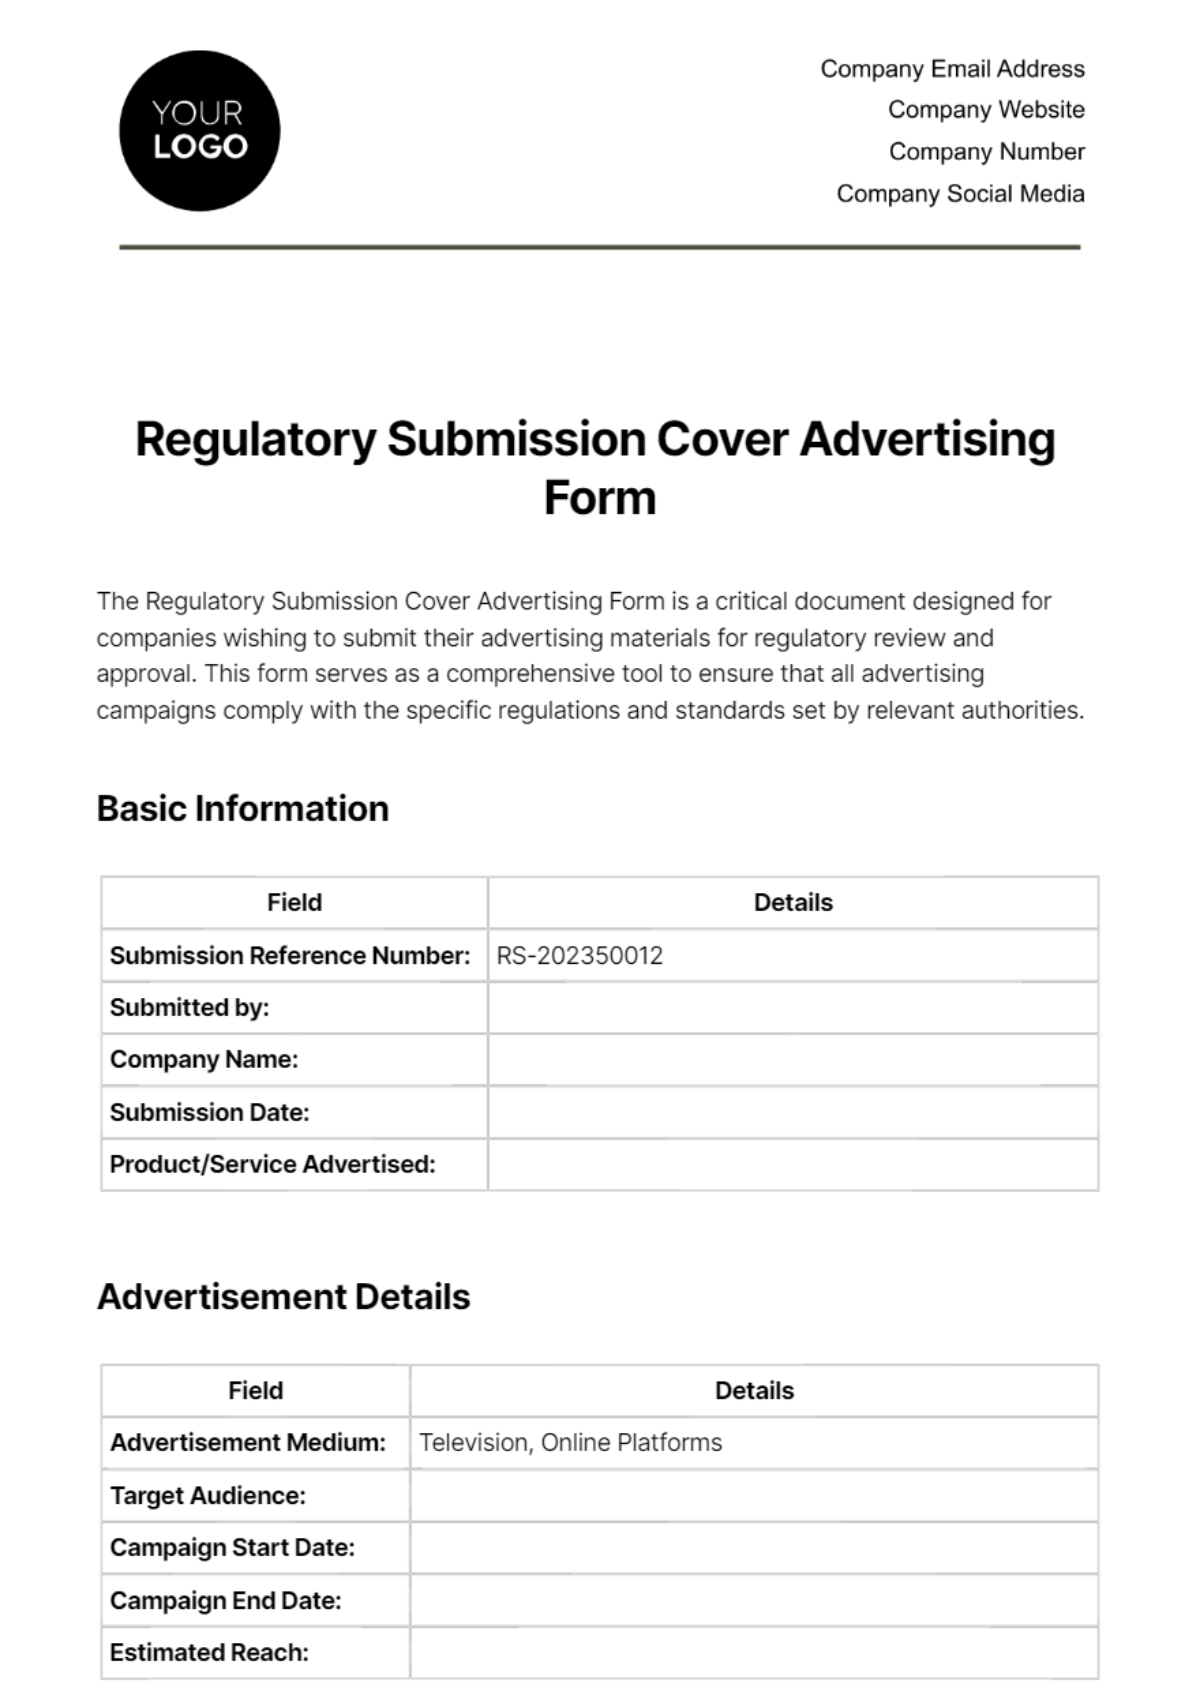 Free Regulatory Submission Cover Advertising Form Template